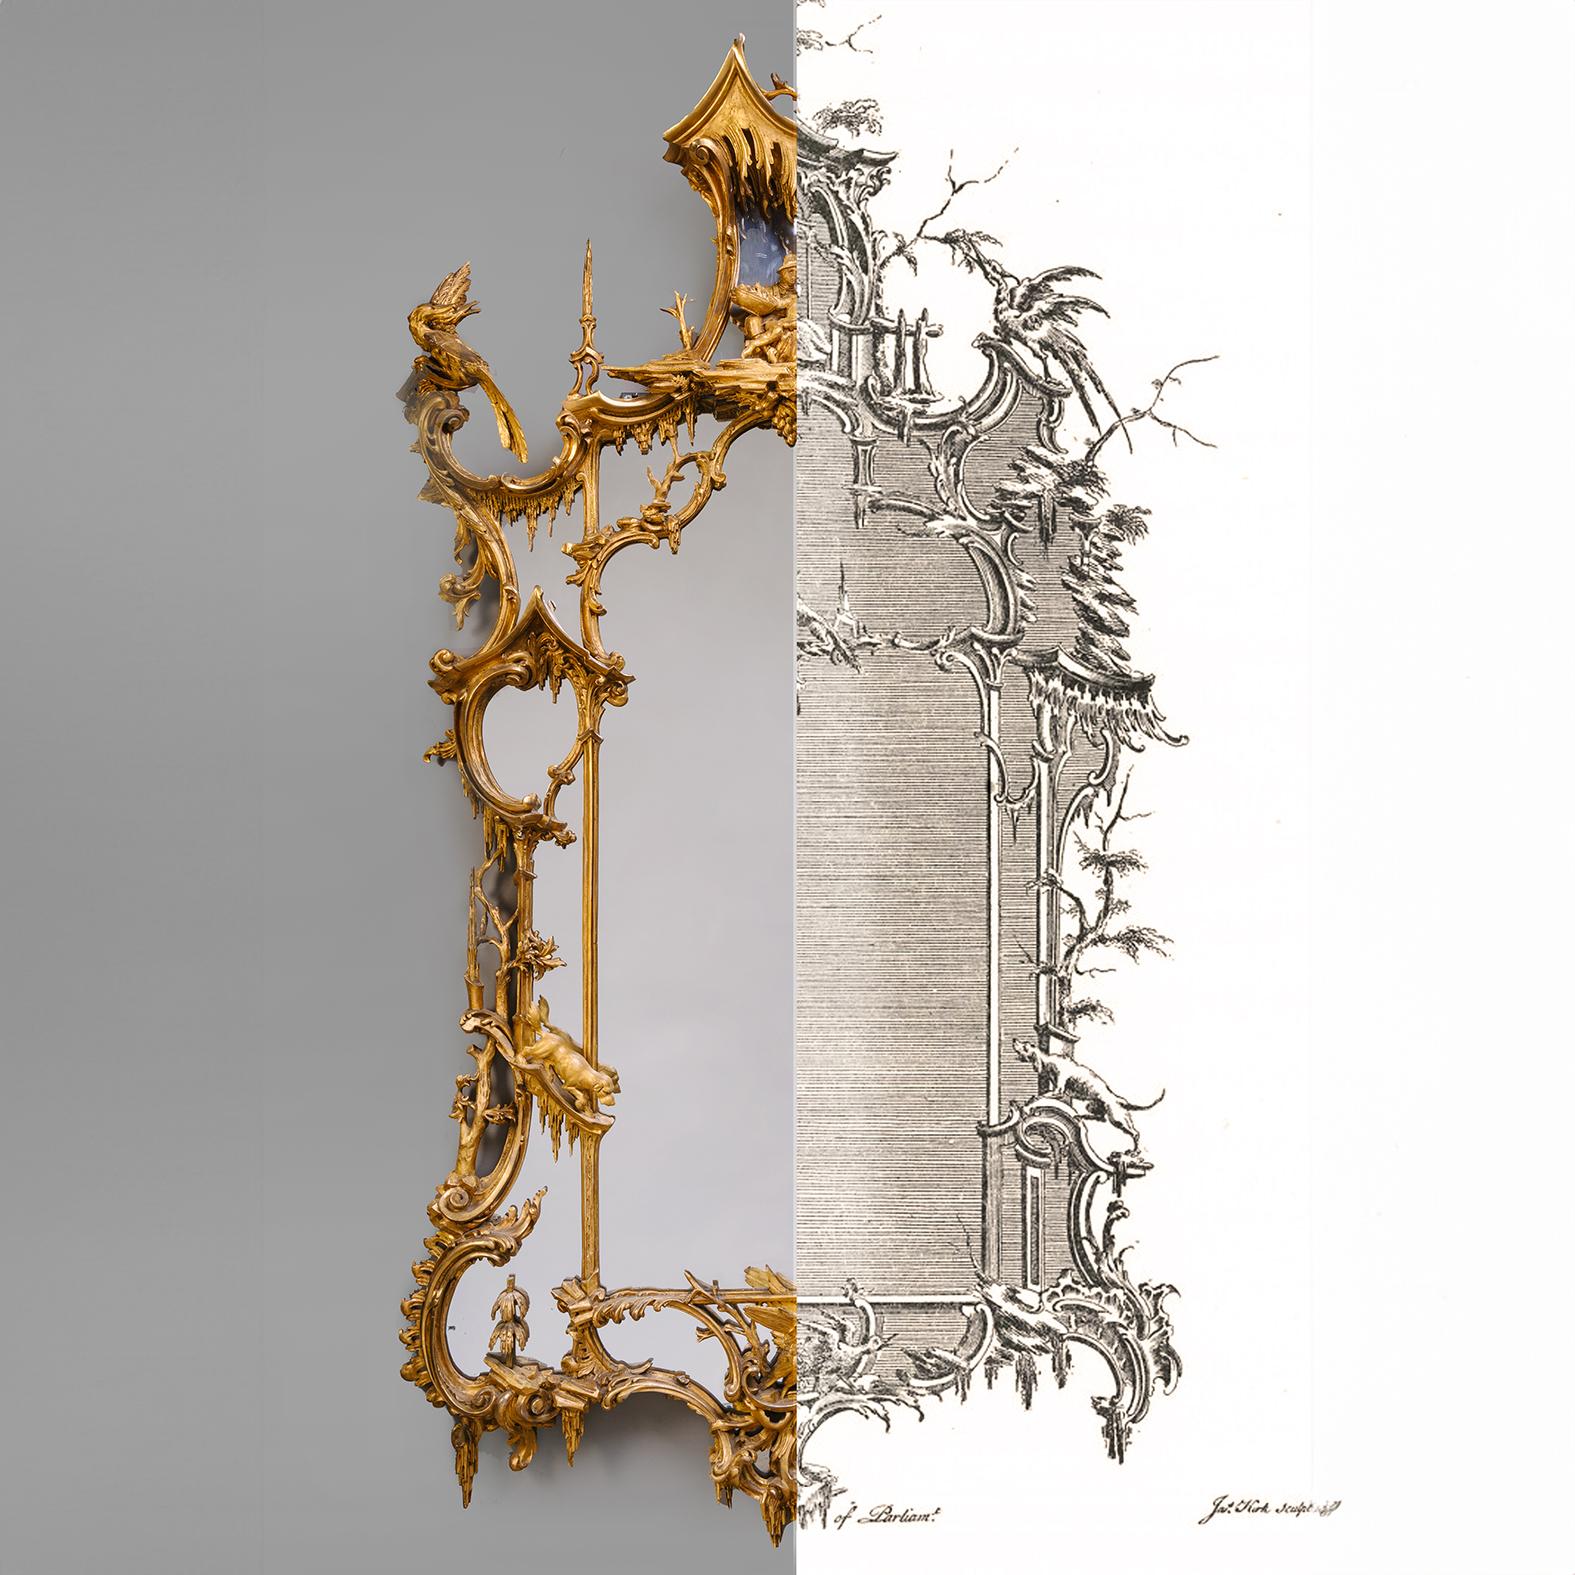 A Magnificent Pair of George II Style English Carved Giltwood ‘Rococo’ Wall Mirrors After A Design By Thomas Johnson.

Of large proportions, each mirror having a cartouche-shaped plate within a profusely carved and pierced branch-entwined frame with